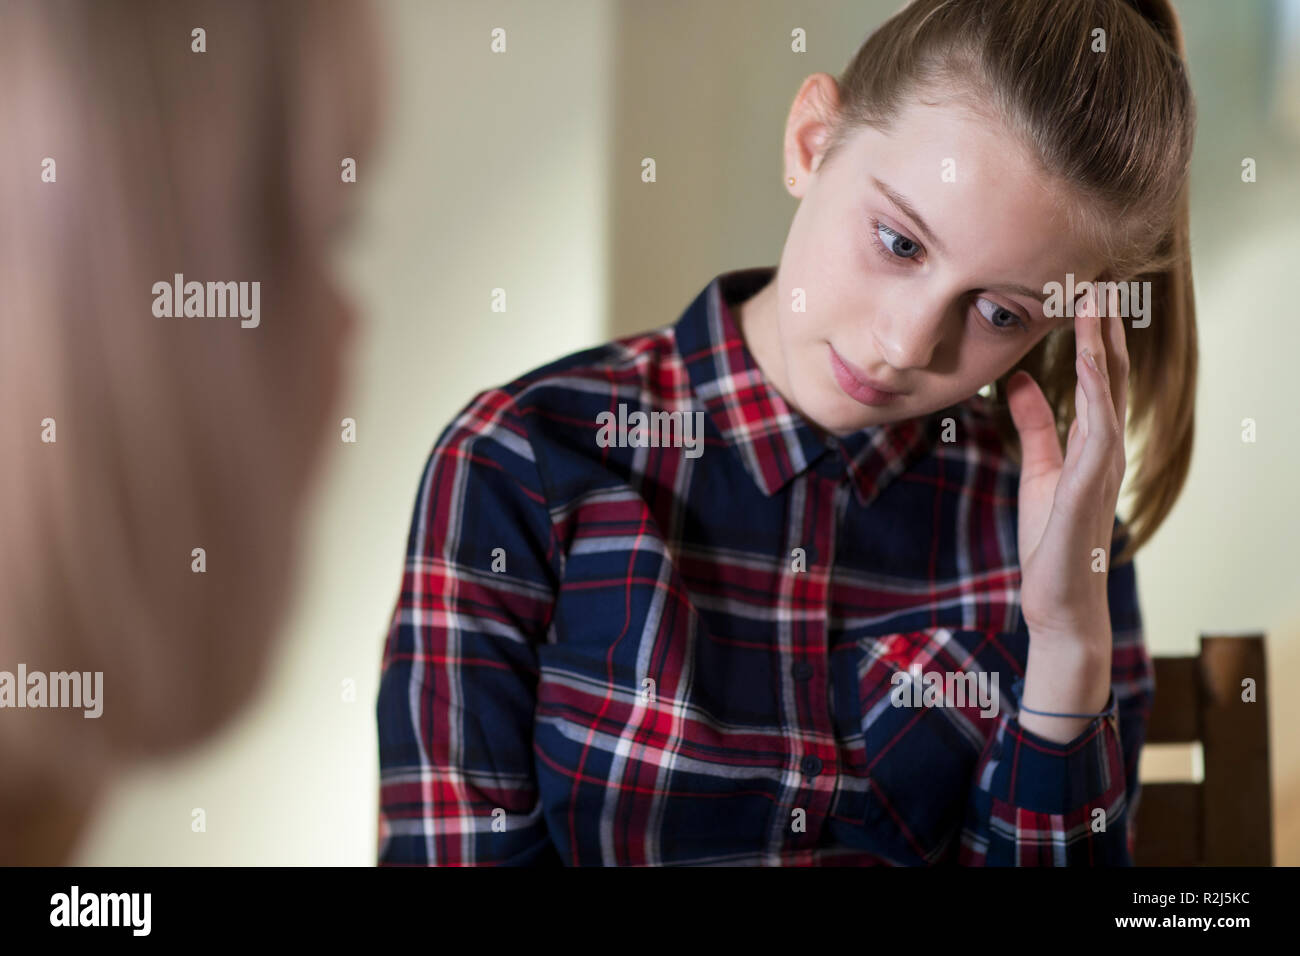 Depressed Teenage Girl Meeting With Counselor Stock Photo